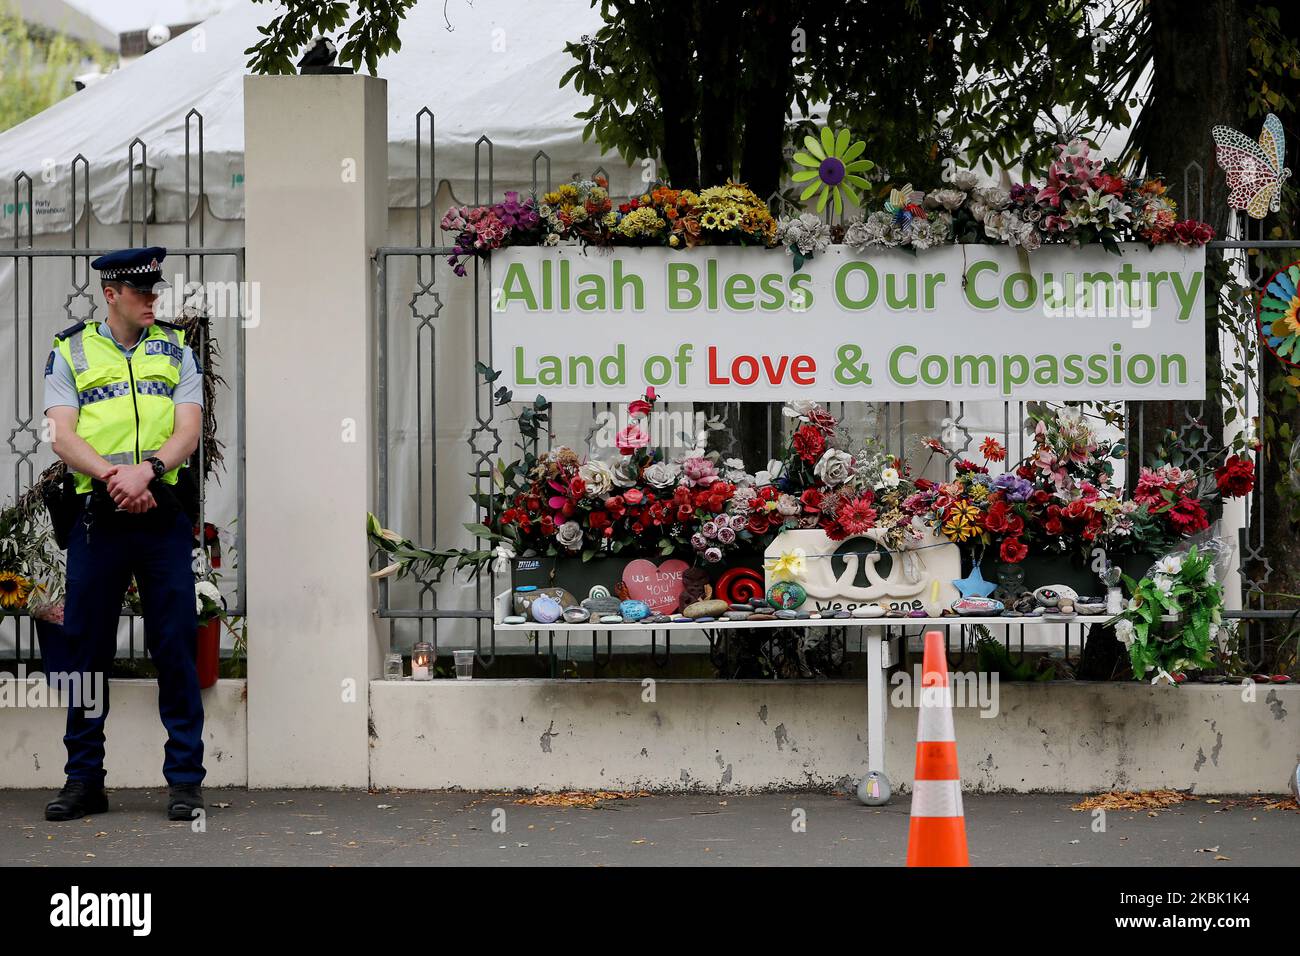 A police officer stands guard outside the Al Noor mosque in Christchurch, New Zealand on March 15, 2020. On March 15 last year, 51 people died and 49 were injured in the shootings at Christchurch's Al Noor and Linwood MosquesÂ when a gunman opened fire on worshippers.Â It was labeled as New Zealand's 'darkest day'.Â Events around the country including the Christchurch National Remembrance Service which marking the first anniversary of the attacks has been canceled amid safety fears over Covid-19.Â (Photo by Sanka Vidanagama/NurPhoto) Stock Photo